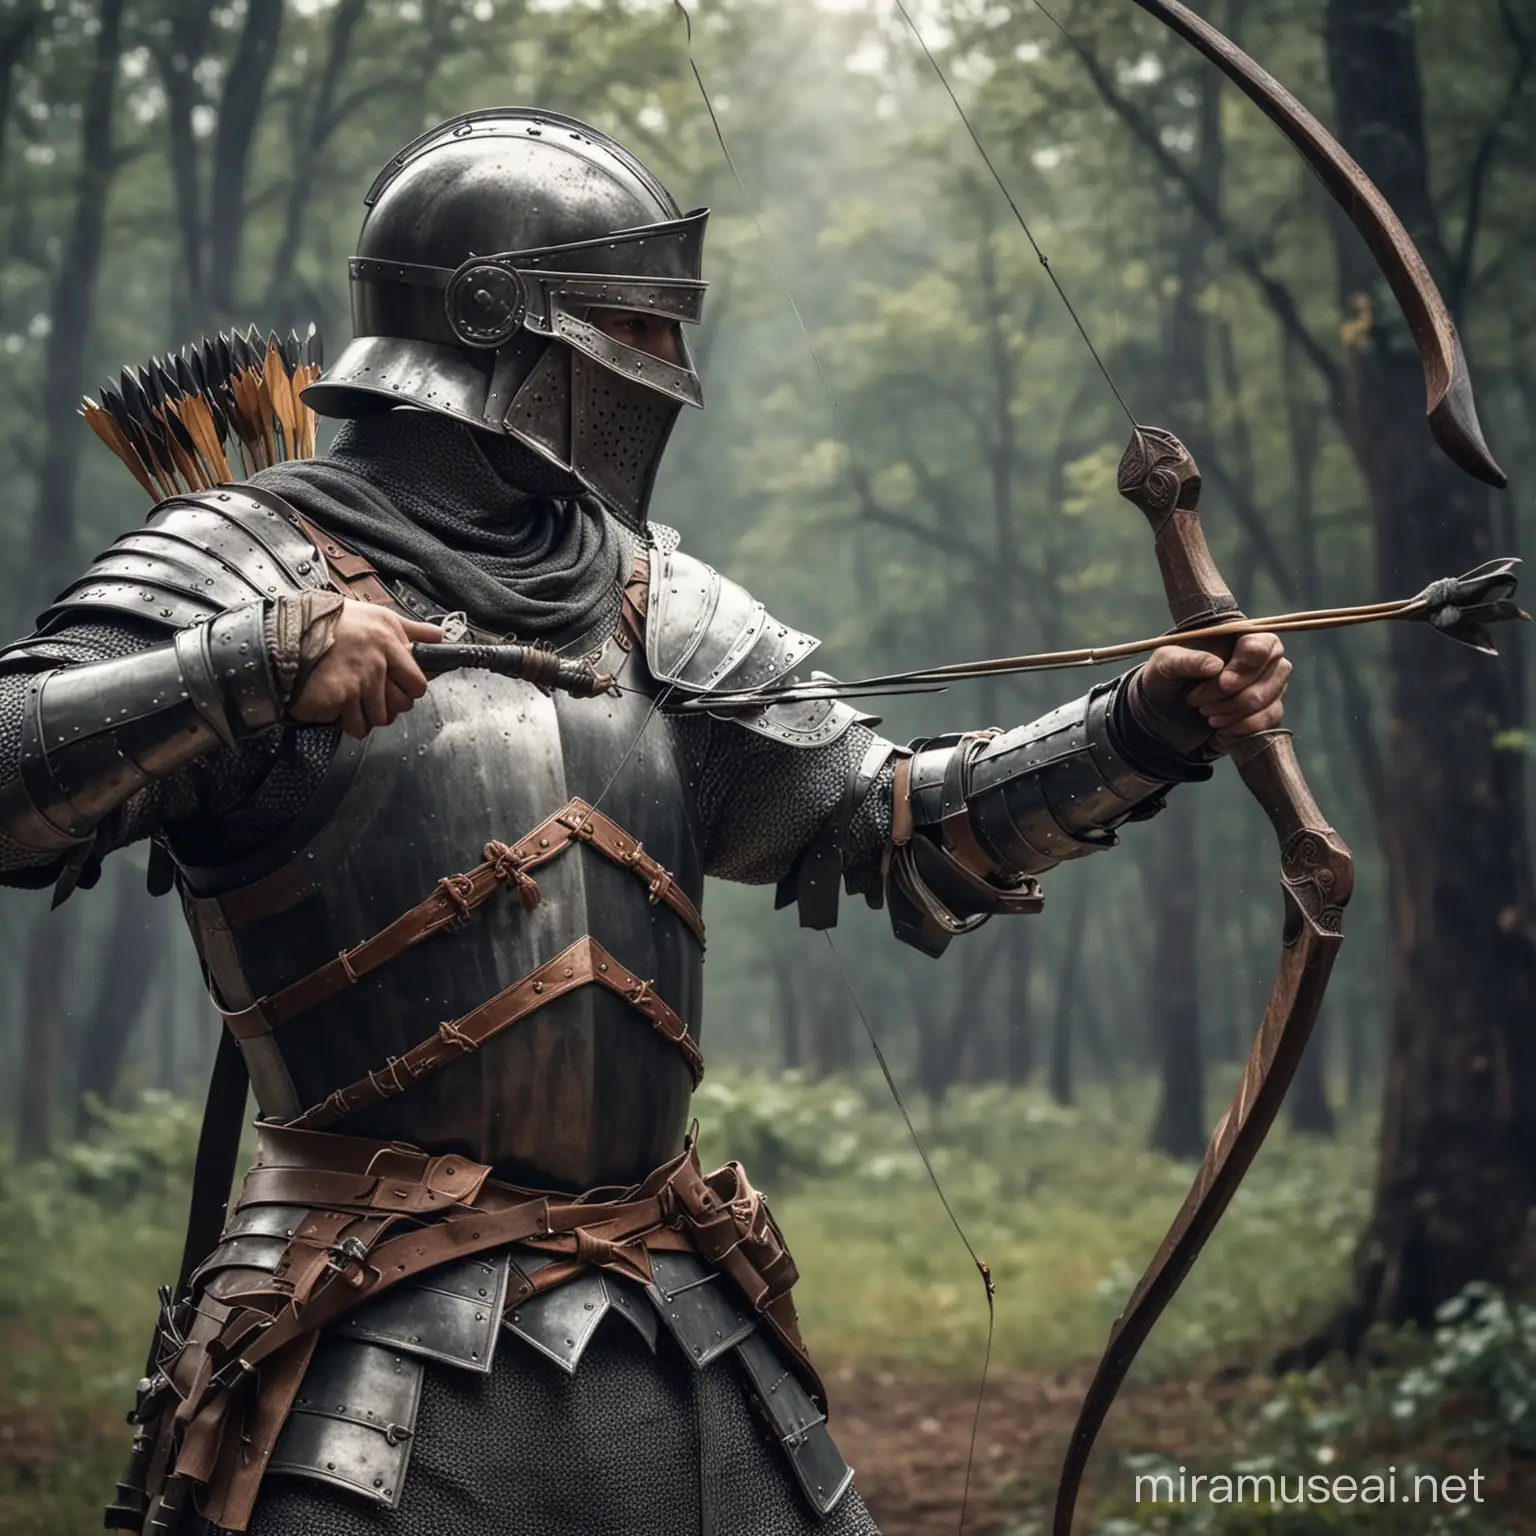 Knight Shooting Arrow with Bow in Medieval Forest